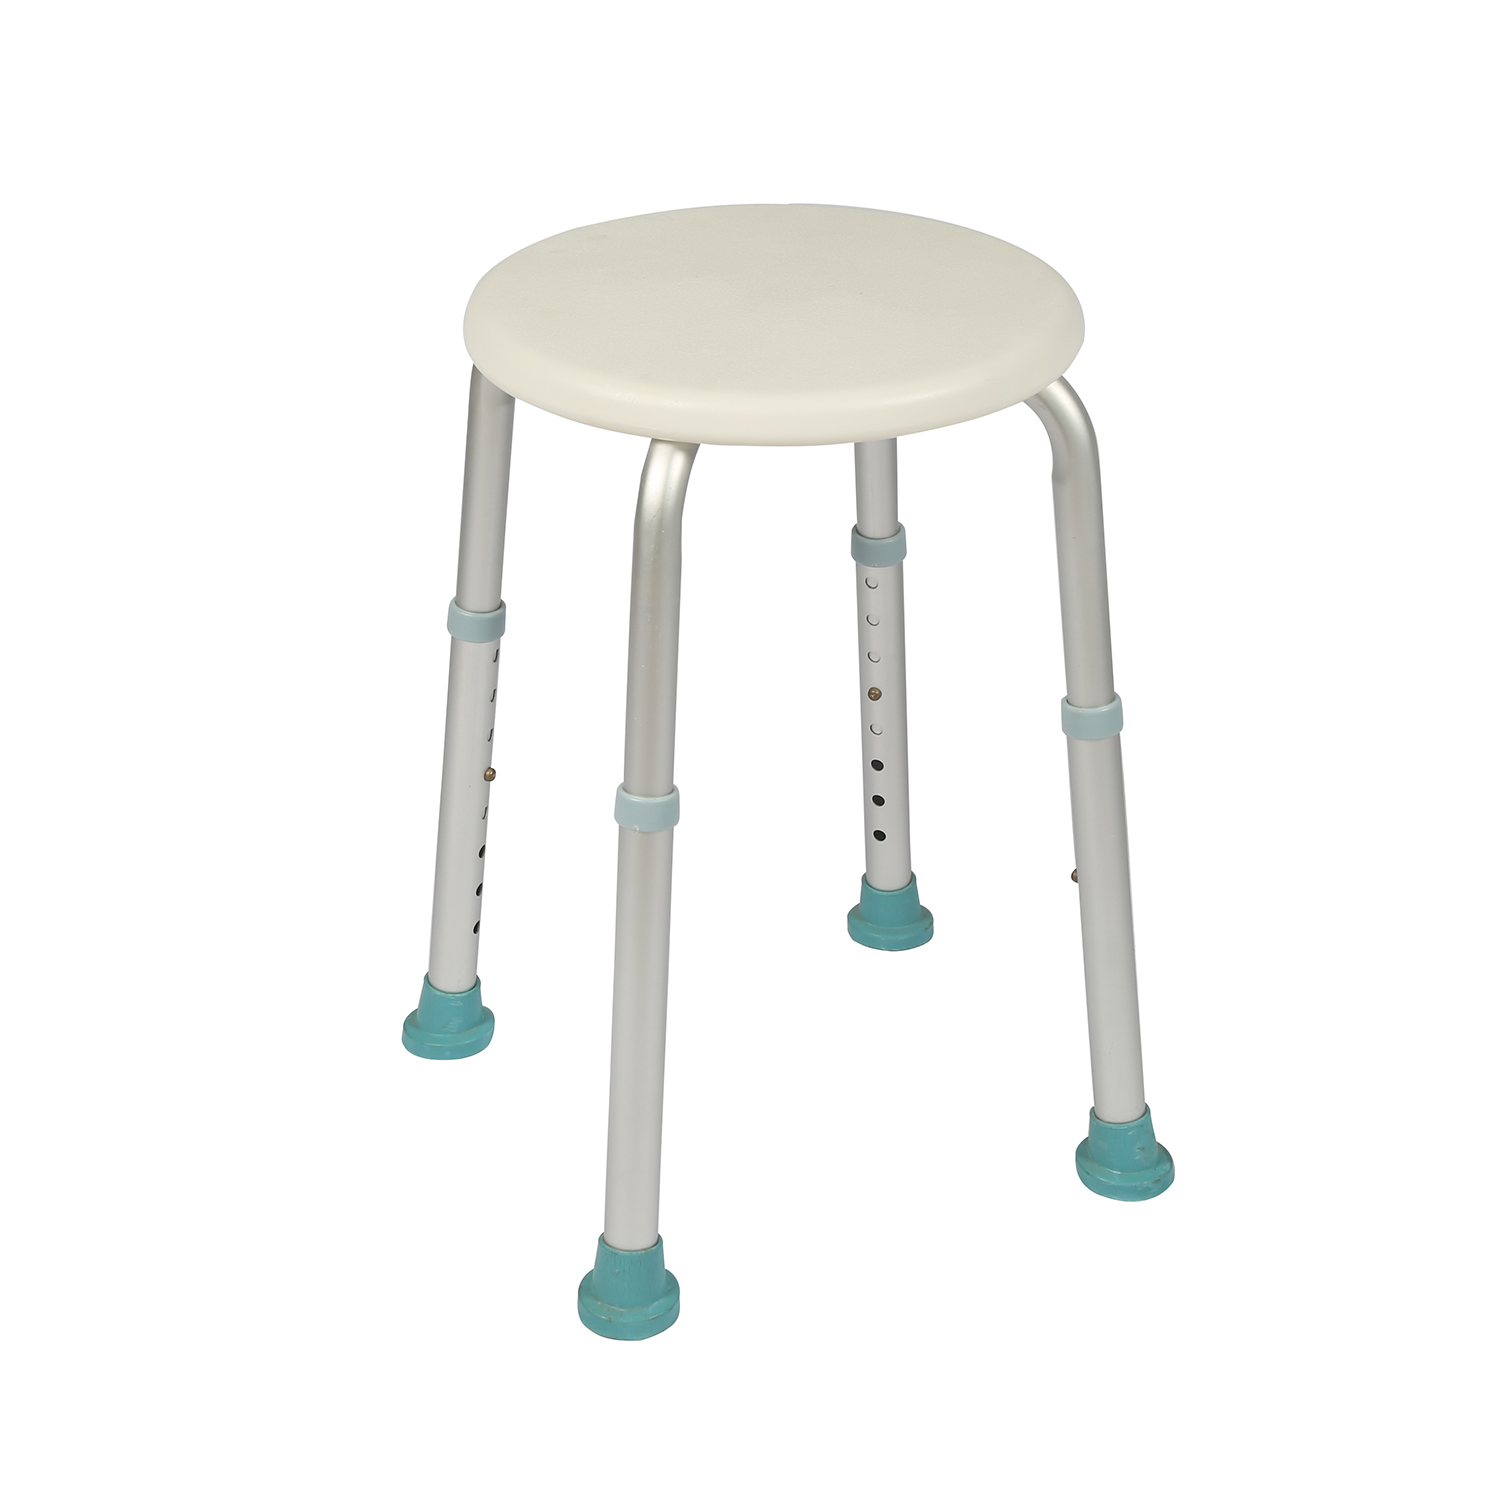 Tool-Free Assembly Adjustable Shower Stool Tub Chair